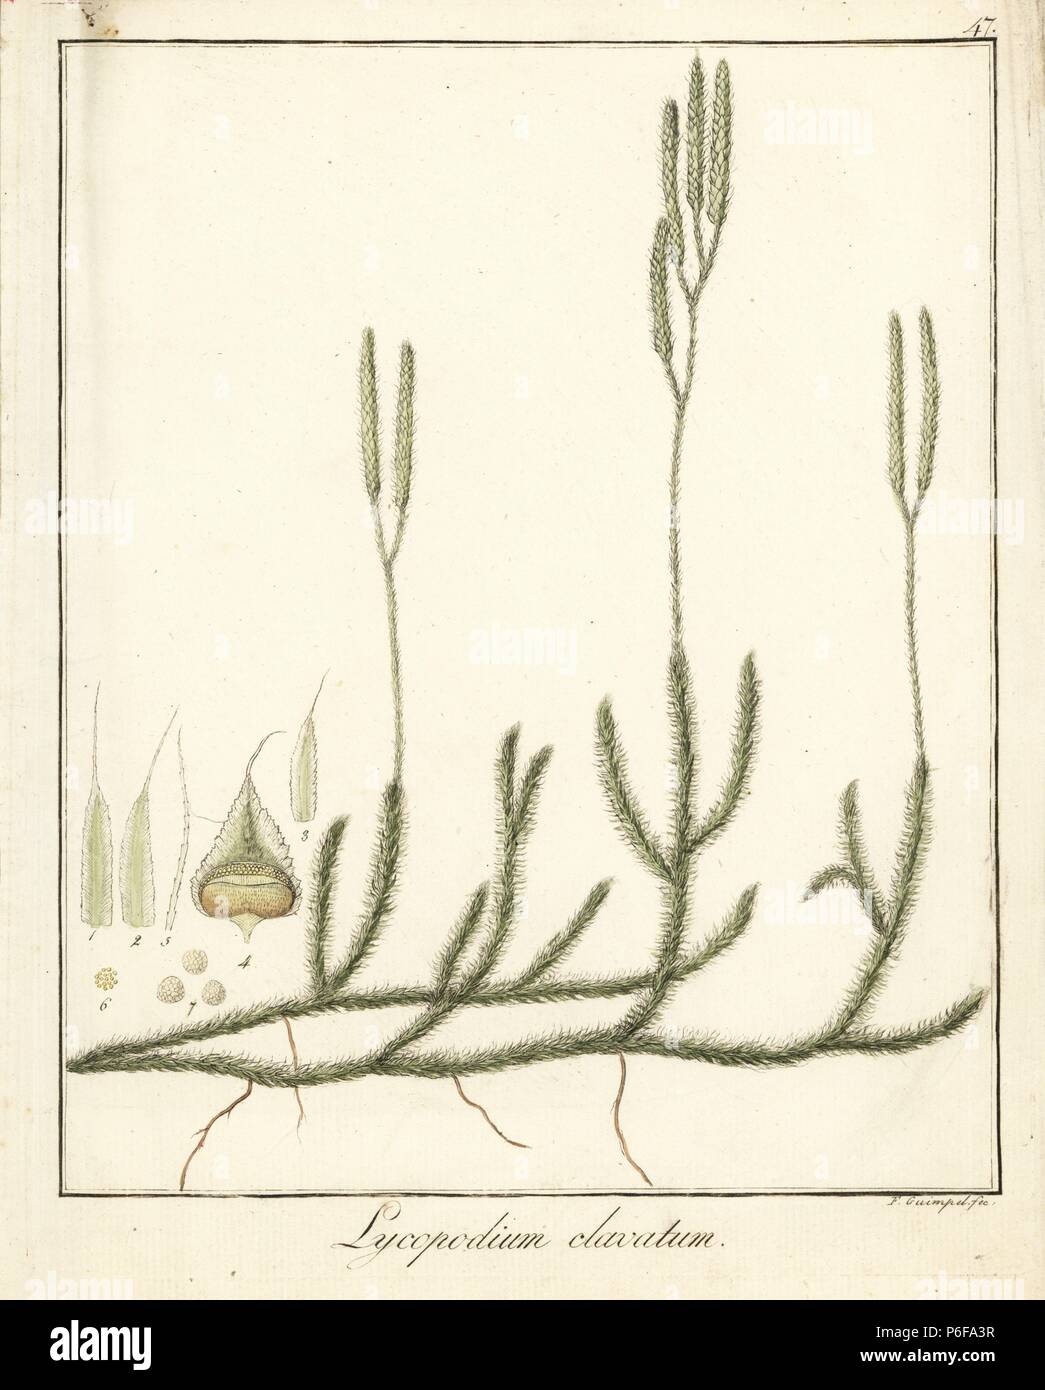 Wolf's-foot clubmoss, Lycopodium clavatum. Handcoloured copperplate engraving by F. Guimpel from Dr. Friedrich Gottlob Hayne's Medical Botany, Berlin, 1822. Hayne (1763-1832) was a German botanist, apothecary and professor of pharmaceutical botany at Berlin University. Stock Photo